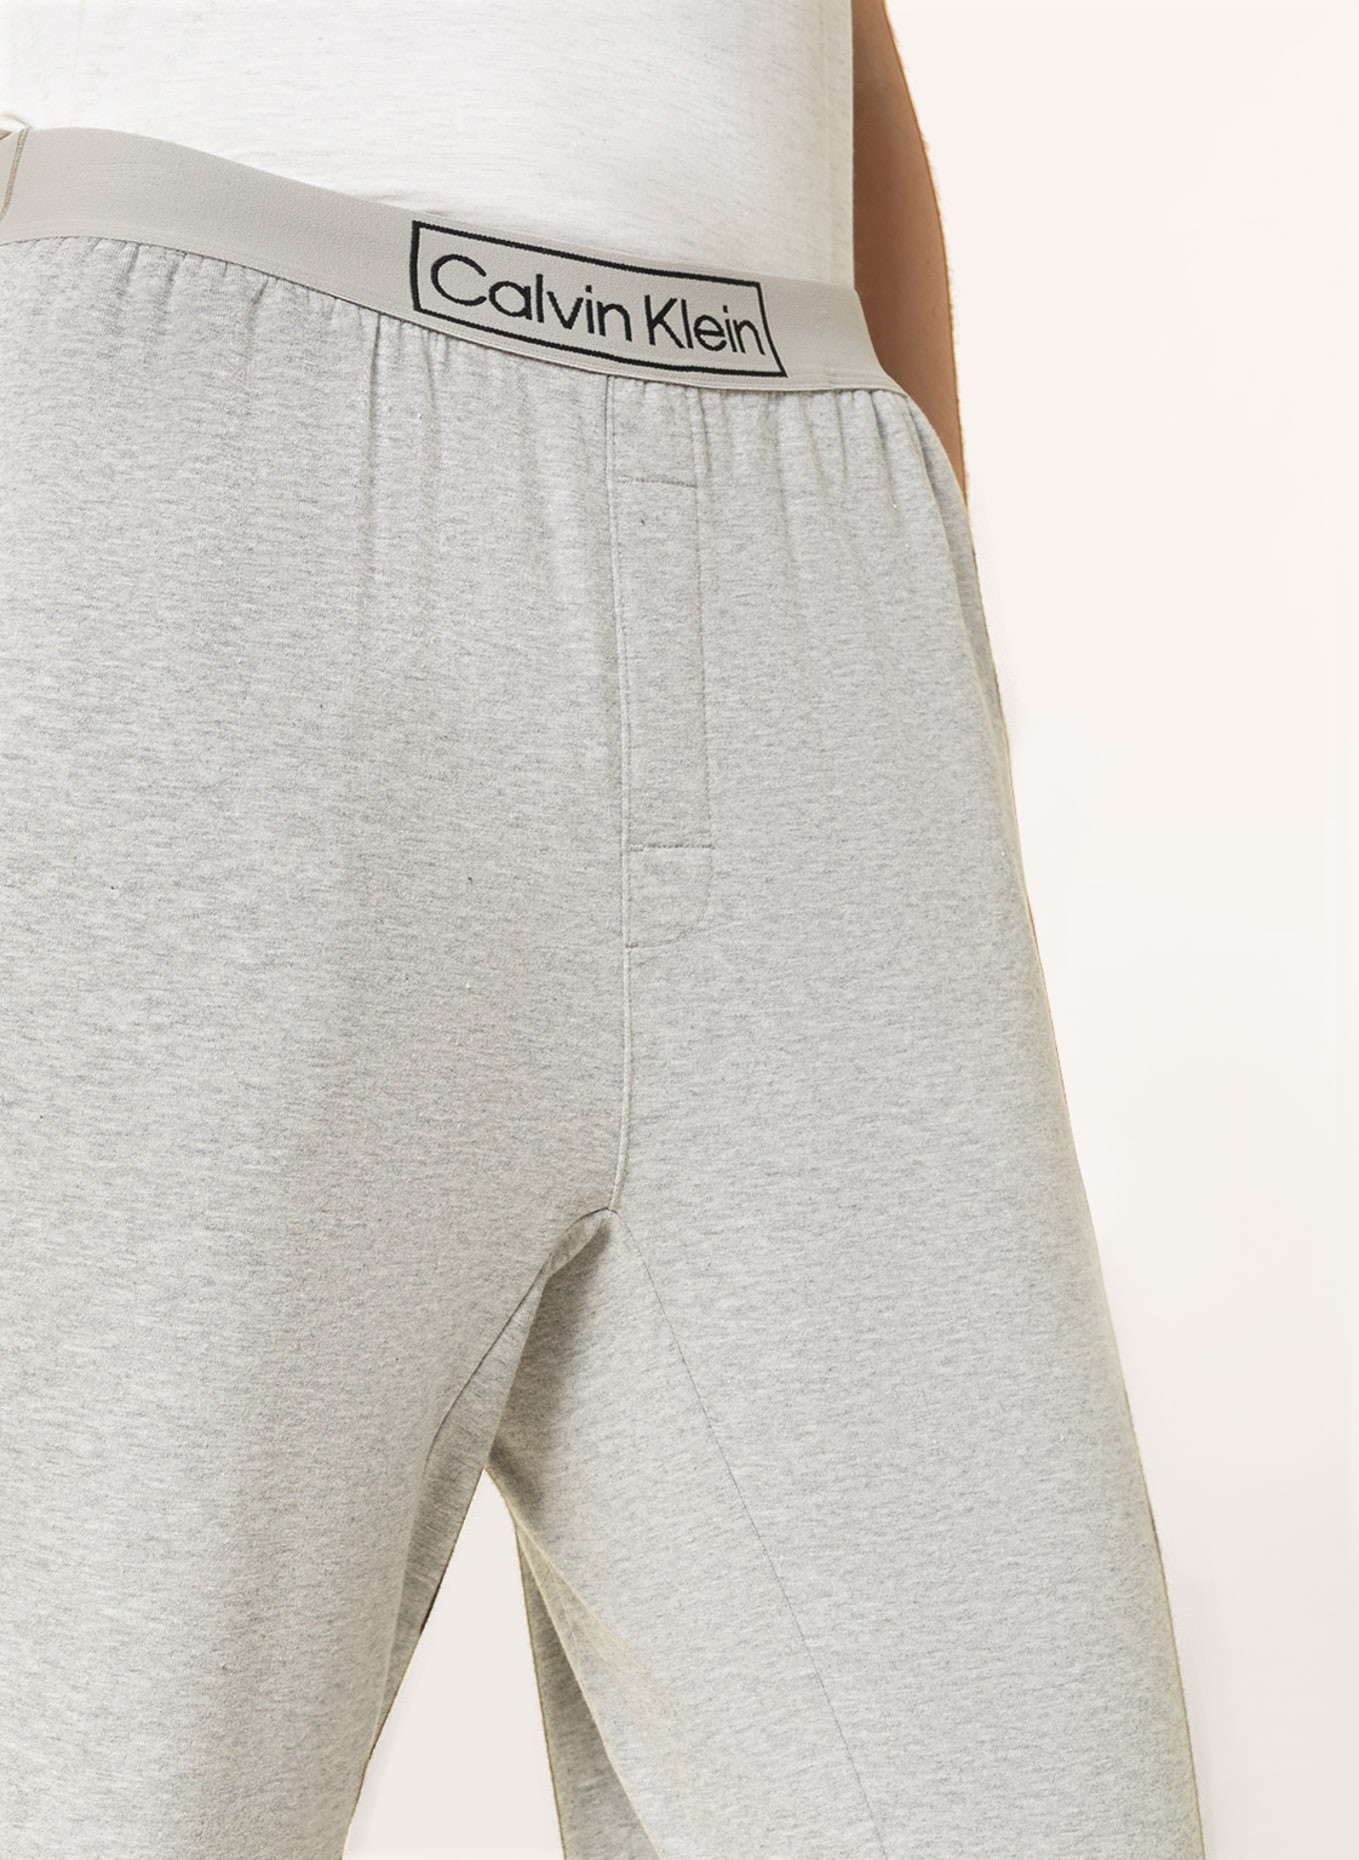 Calvin Klein Lounge pants REIMAGINED HERITAGE, Color: GRAY (Image 5)